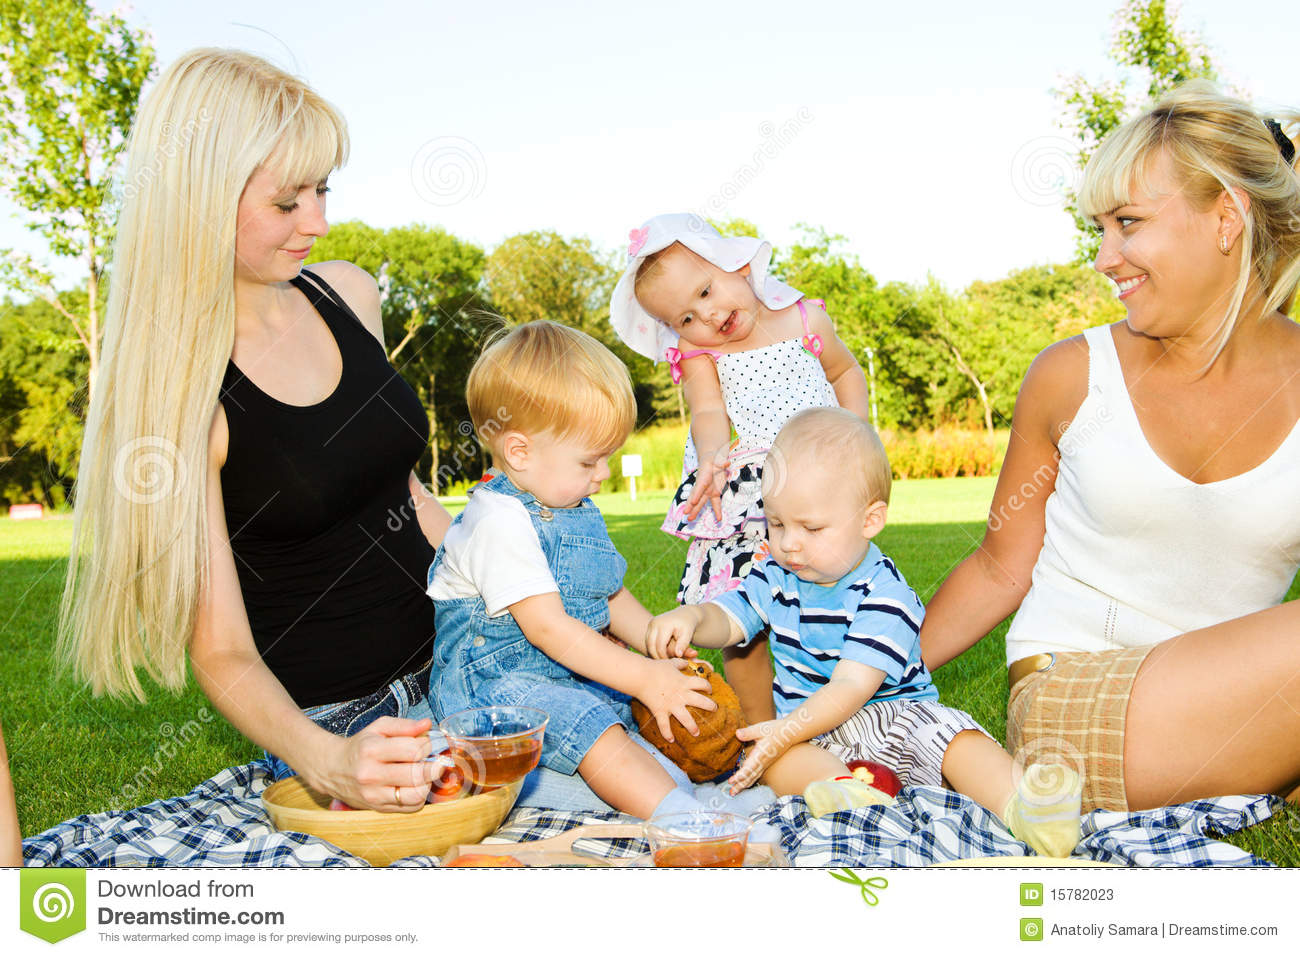 Lovely Toddler Kids Eating Cake Mother Looking At Them 